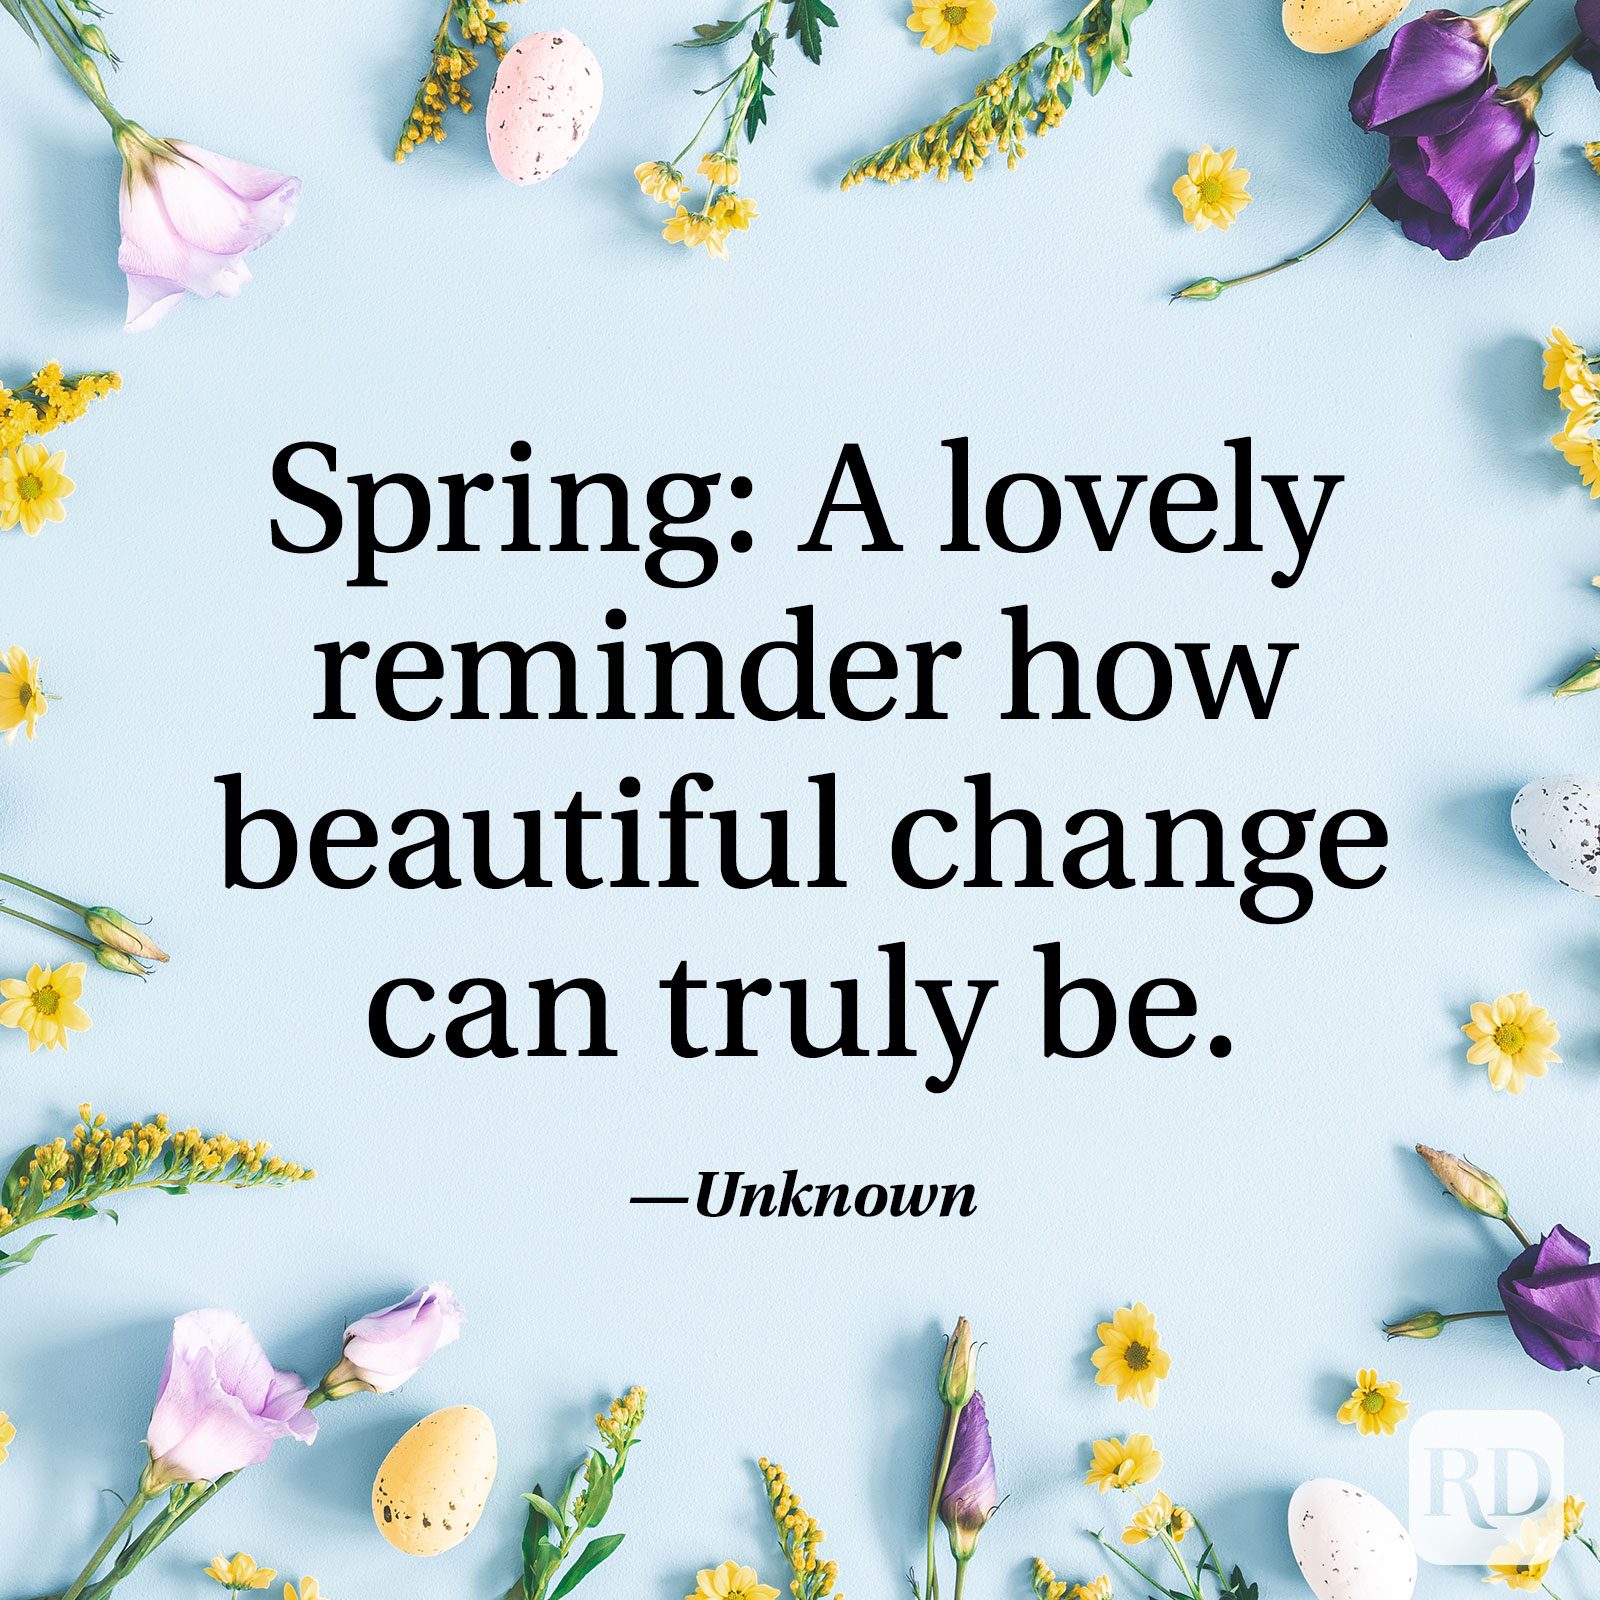 27 of the Best Easter Quotes 2021 | Reader's Digest